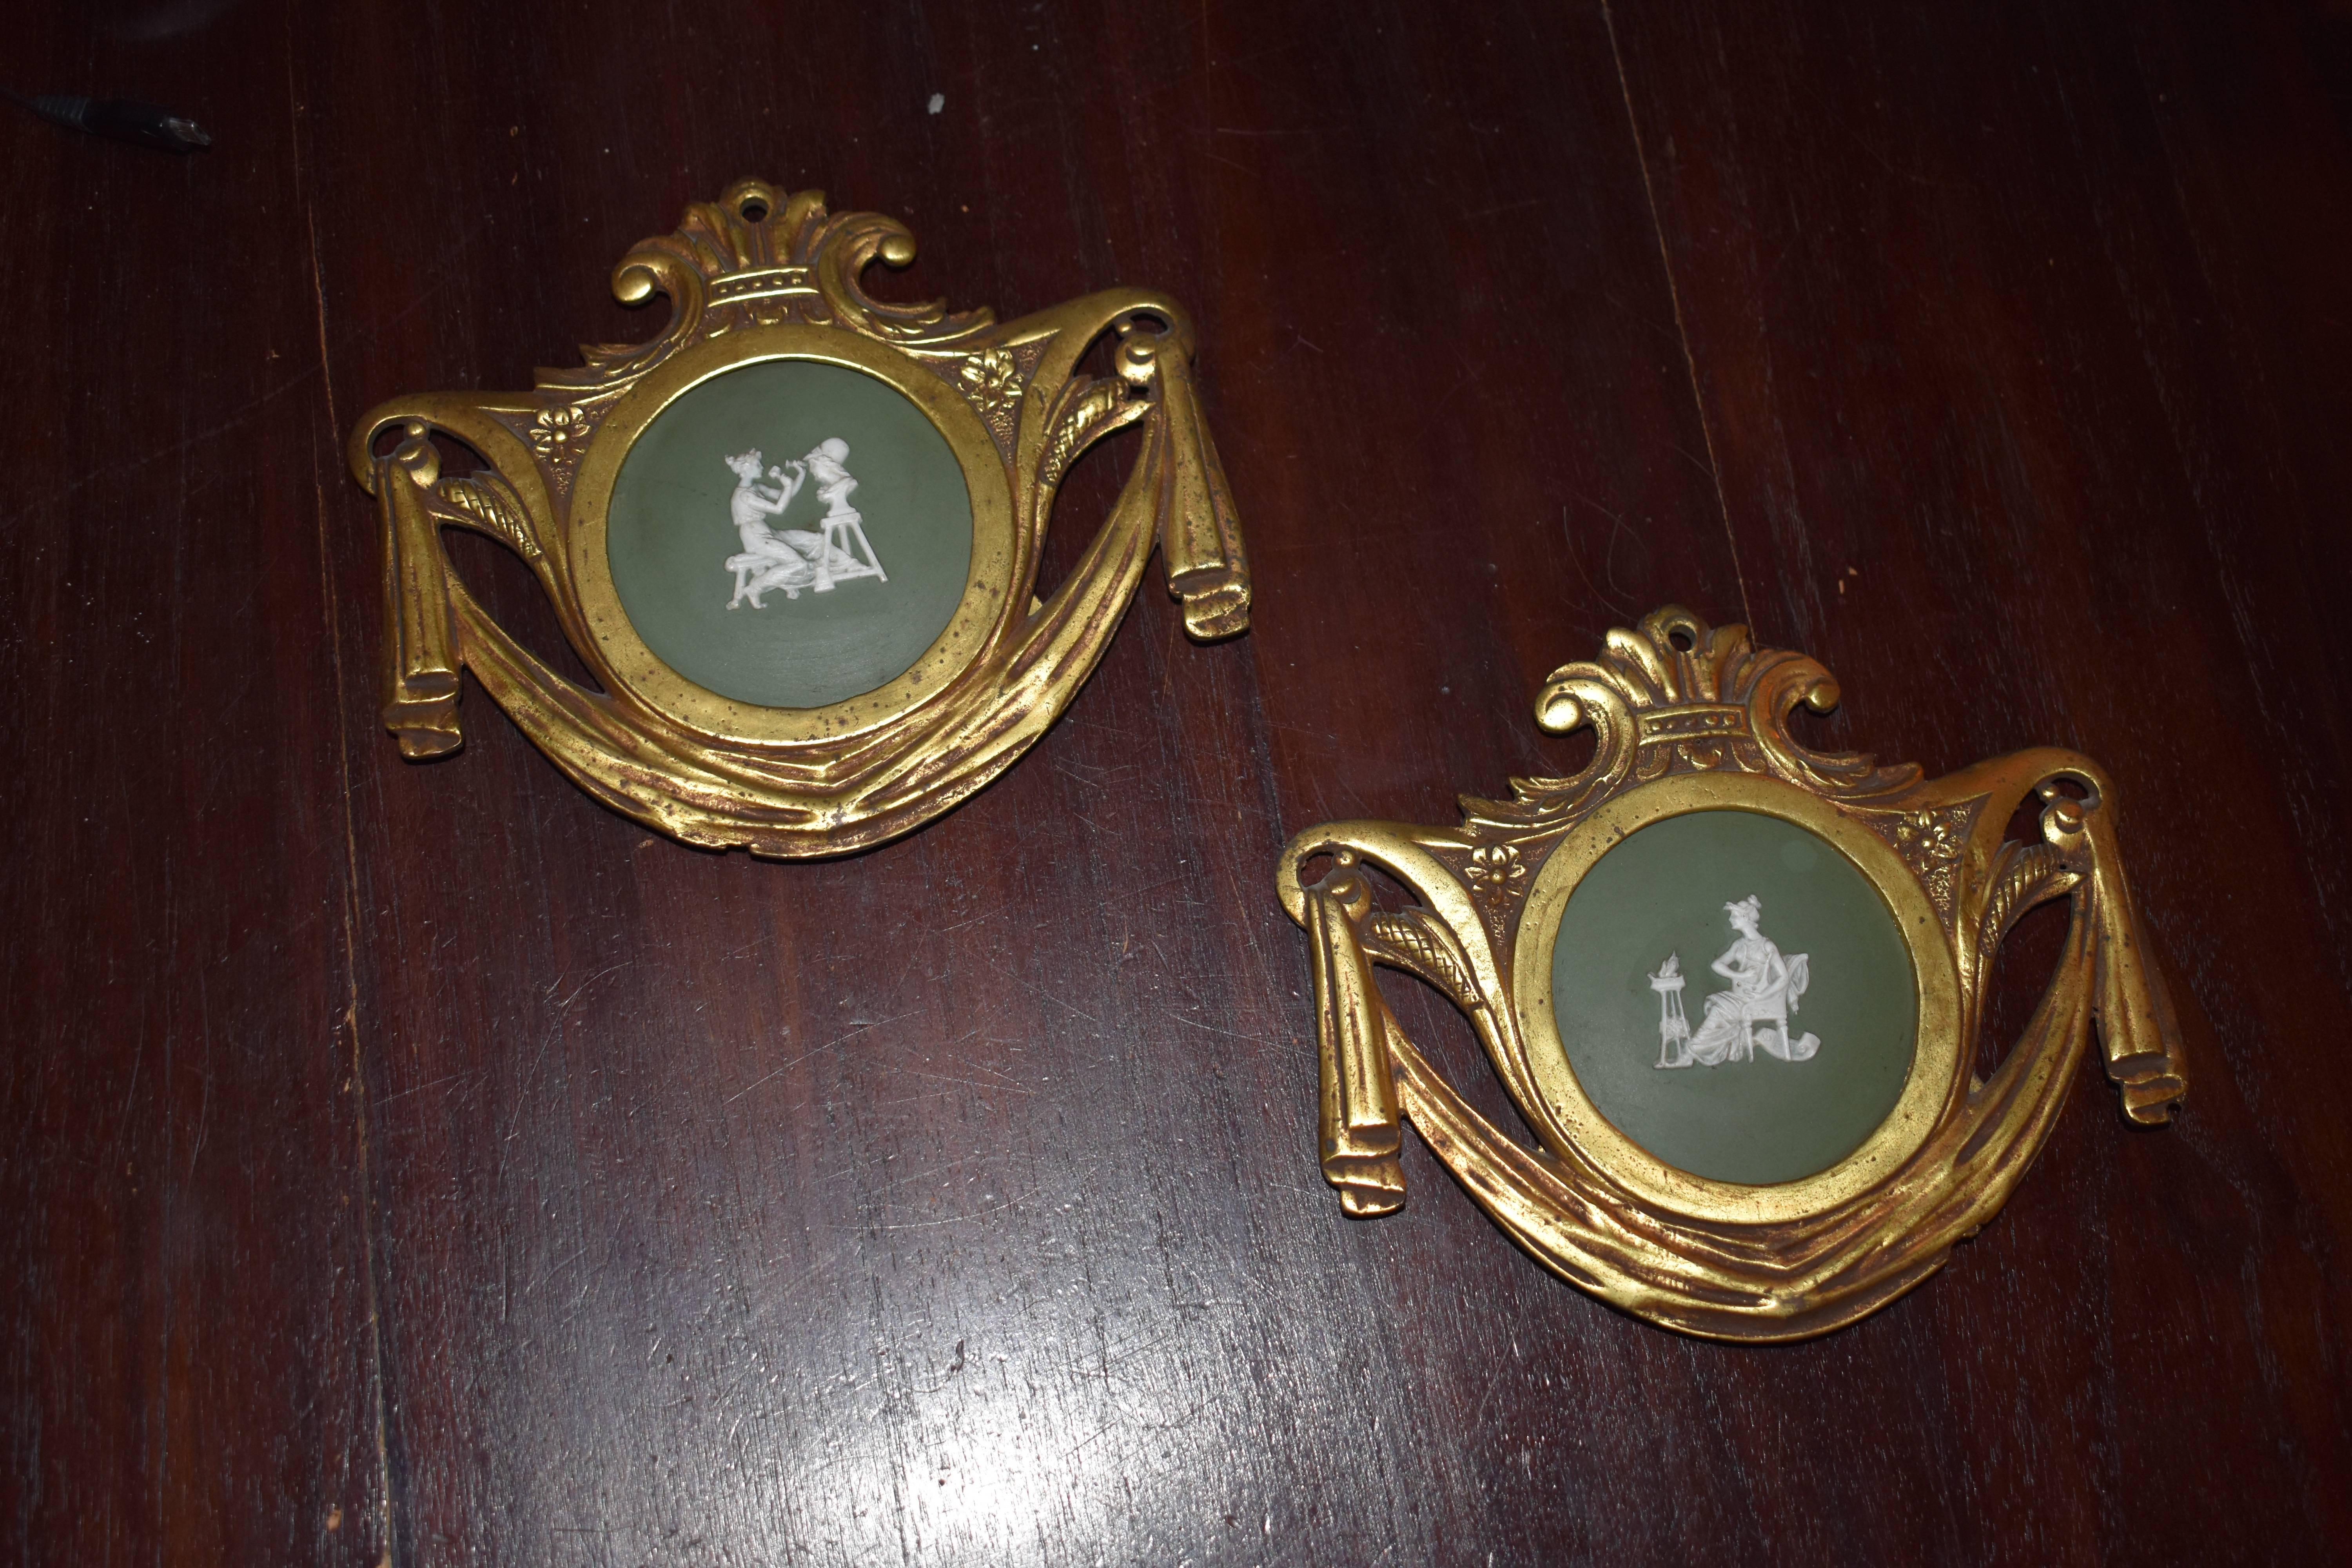 Miniature jasperware ornament plaques framed in gilt bronze, in the style of Wedgwood.

These two miniatures jasperware plaques have a dark green center which provides a lovely background for the neoclassical relief. The details of the plaques are